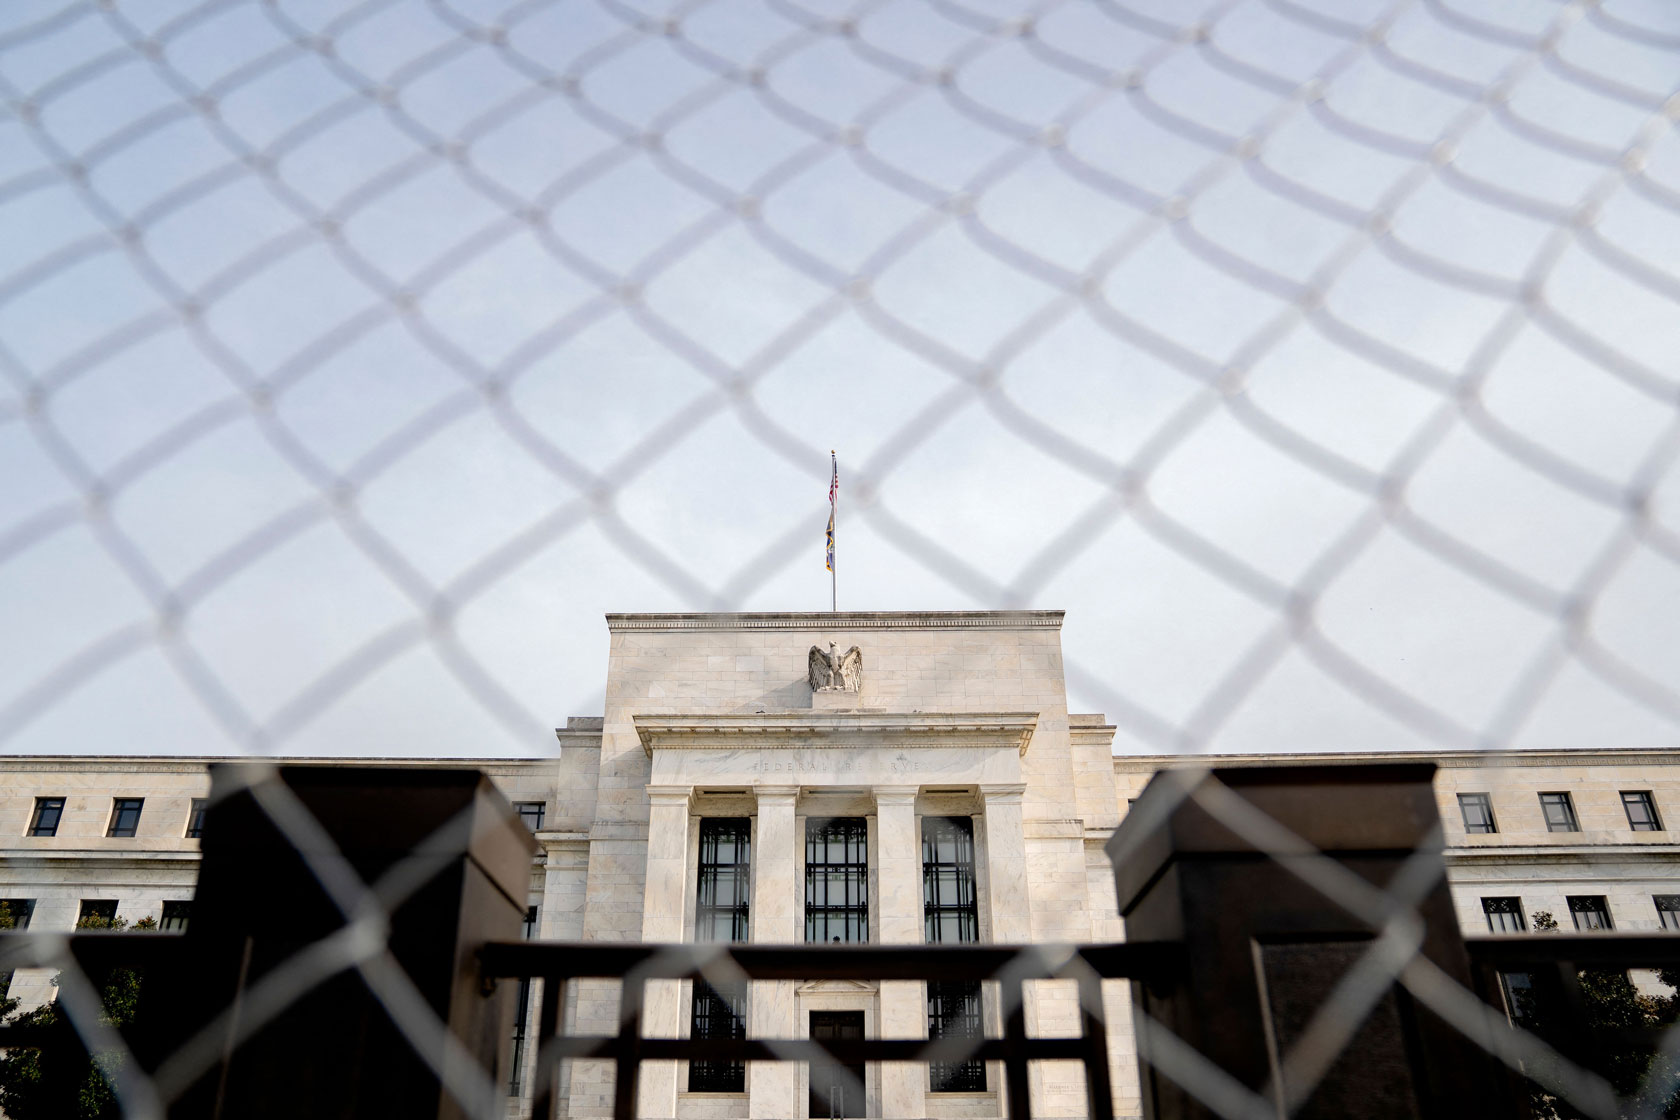 Photo shows the Federal Reserve building through fencing.